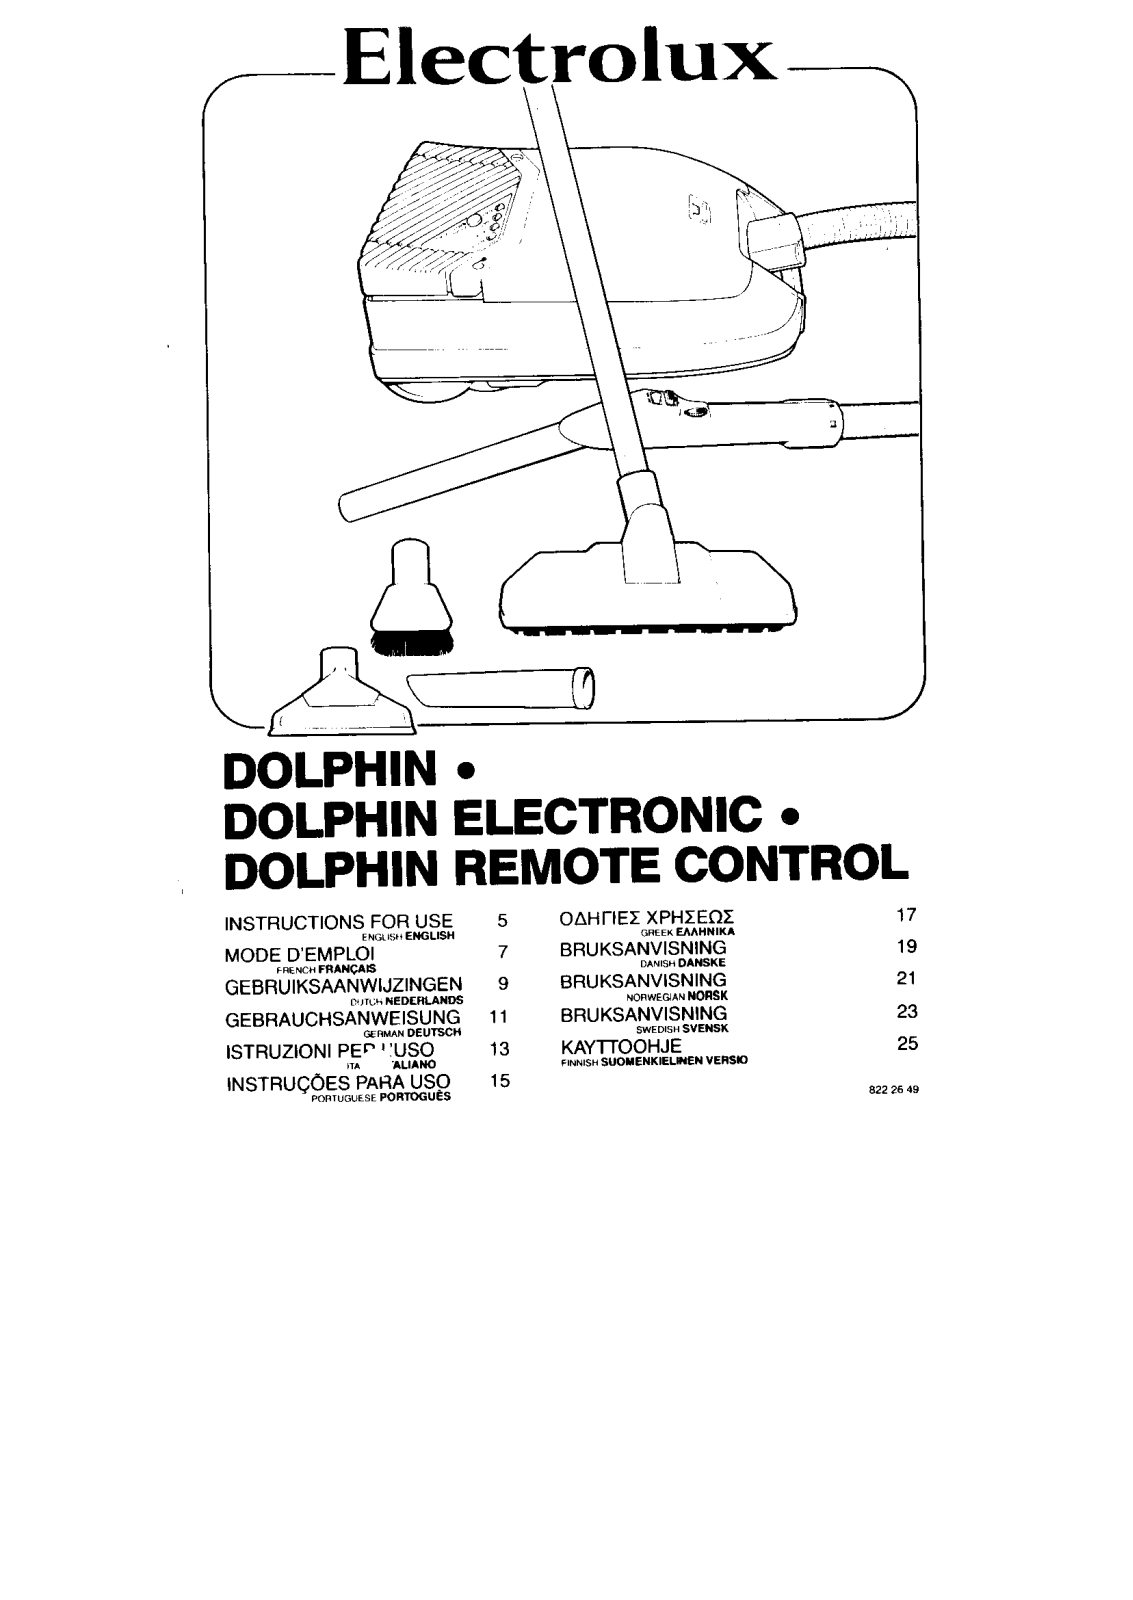 electrolux dolphin series, dolphin elecronic series, dolphin remote control series User Manual